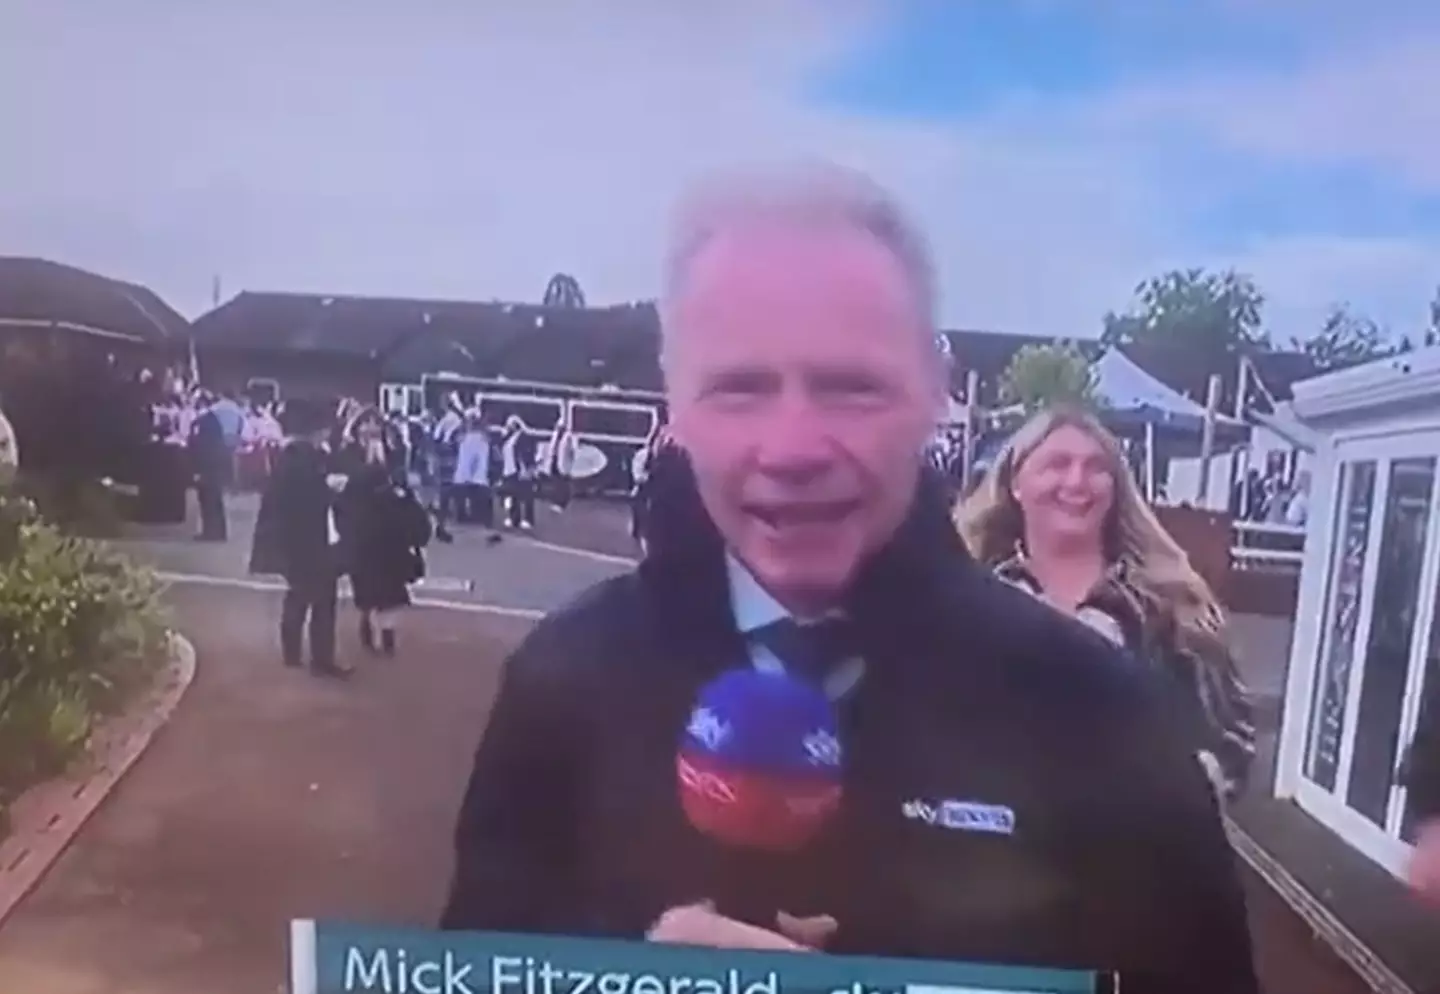 Mick Fitzgerald was able to block most of what happened with his body. Well done that man.